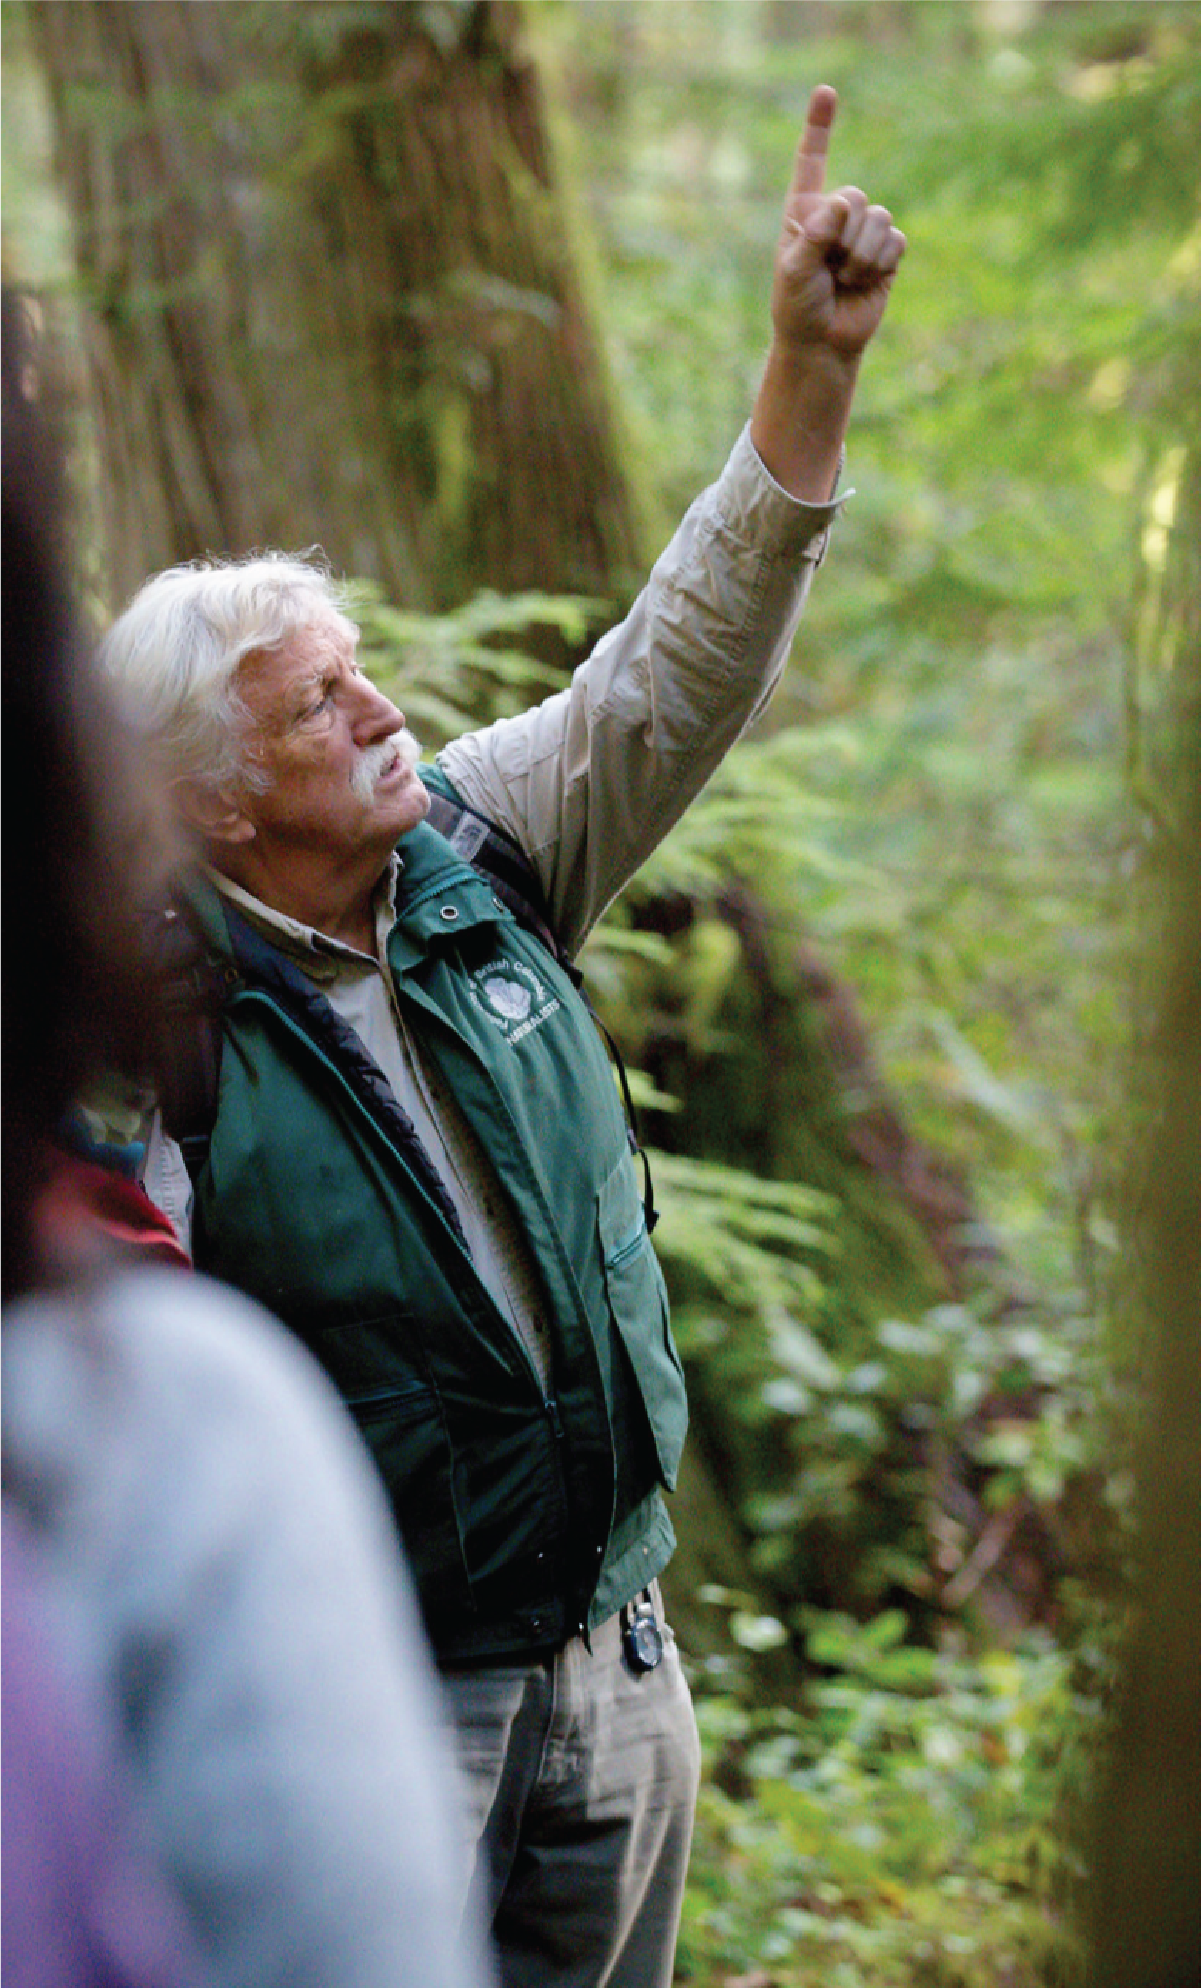 Man hosting nature tour at Hollyhock Retreat Centre in Cortes Island, BC